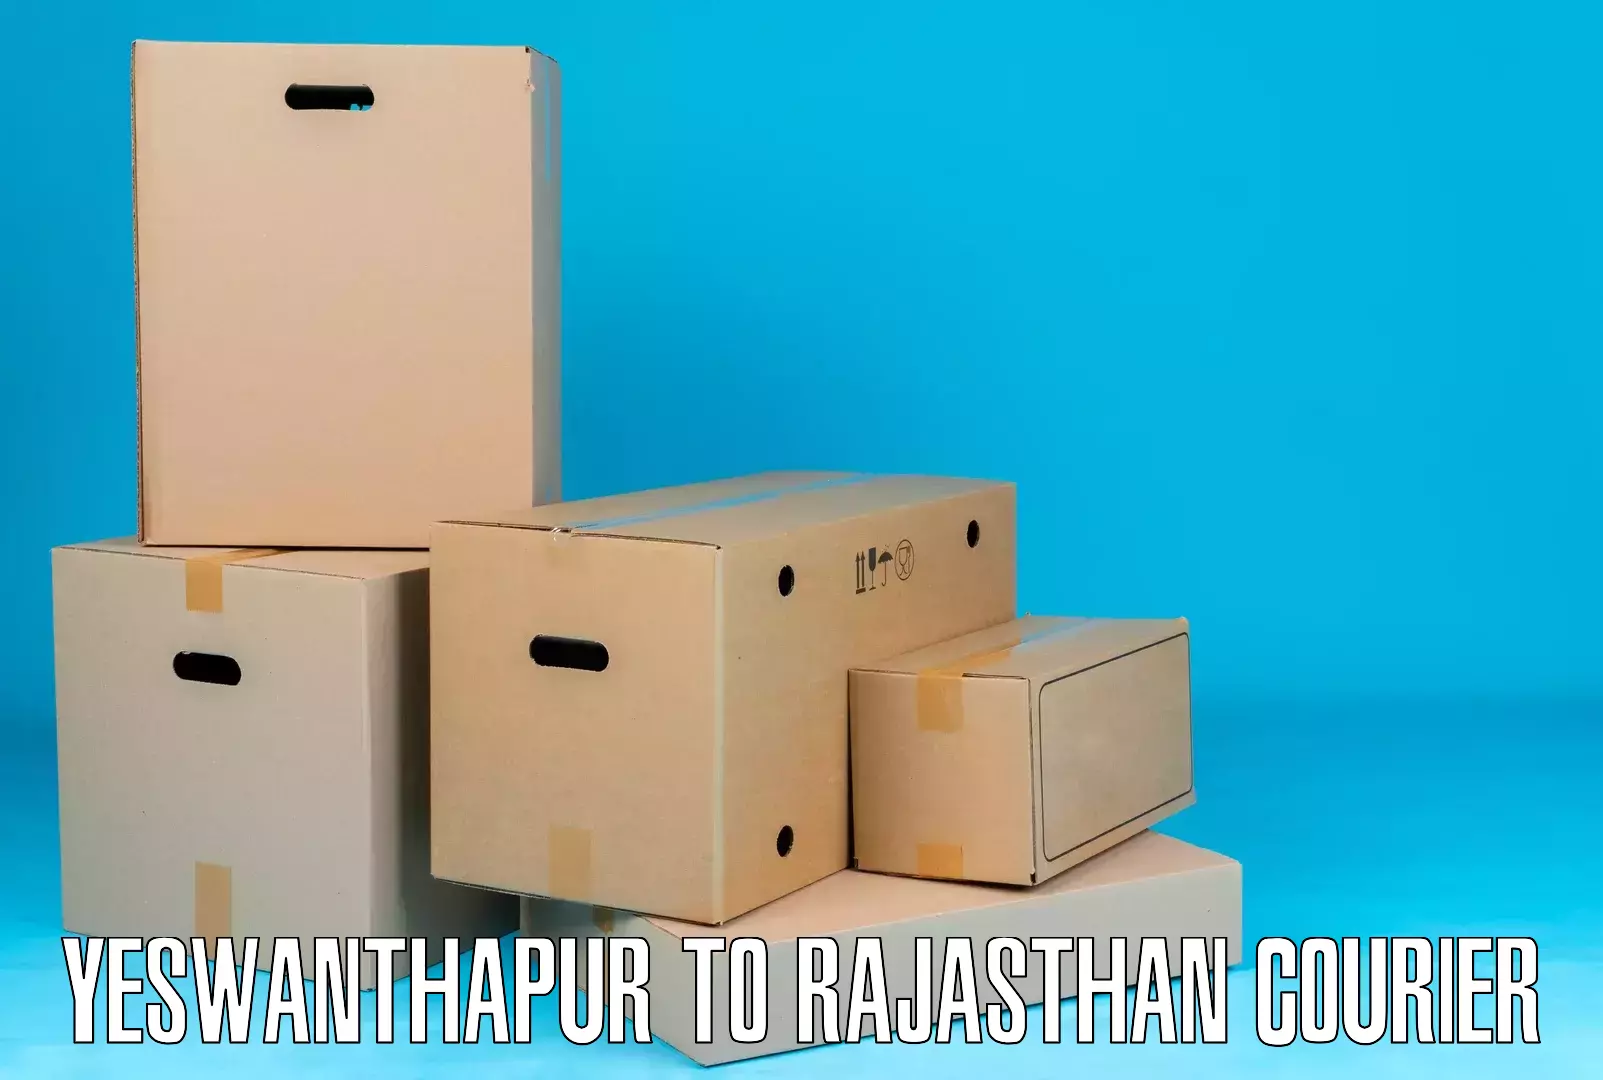 Residential courier service Yeswanthapur to Sumerpur